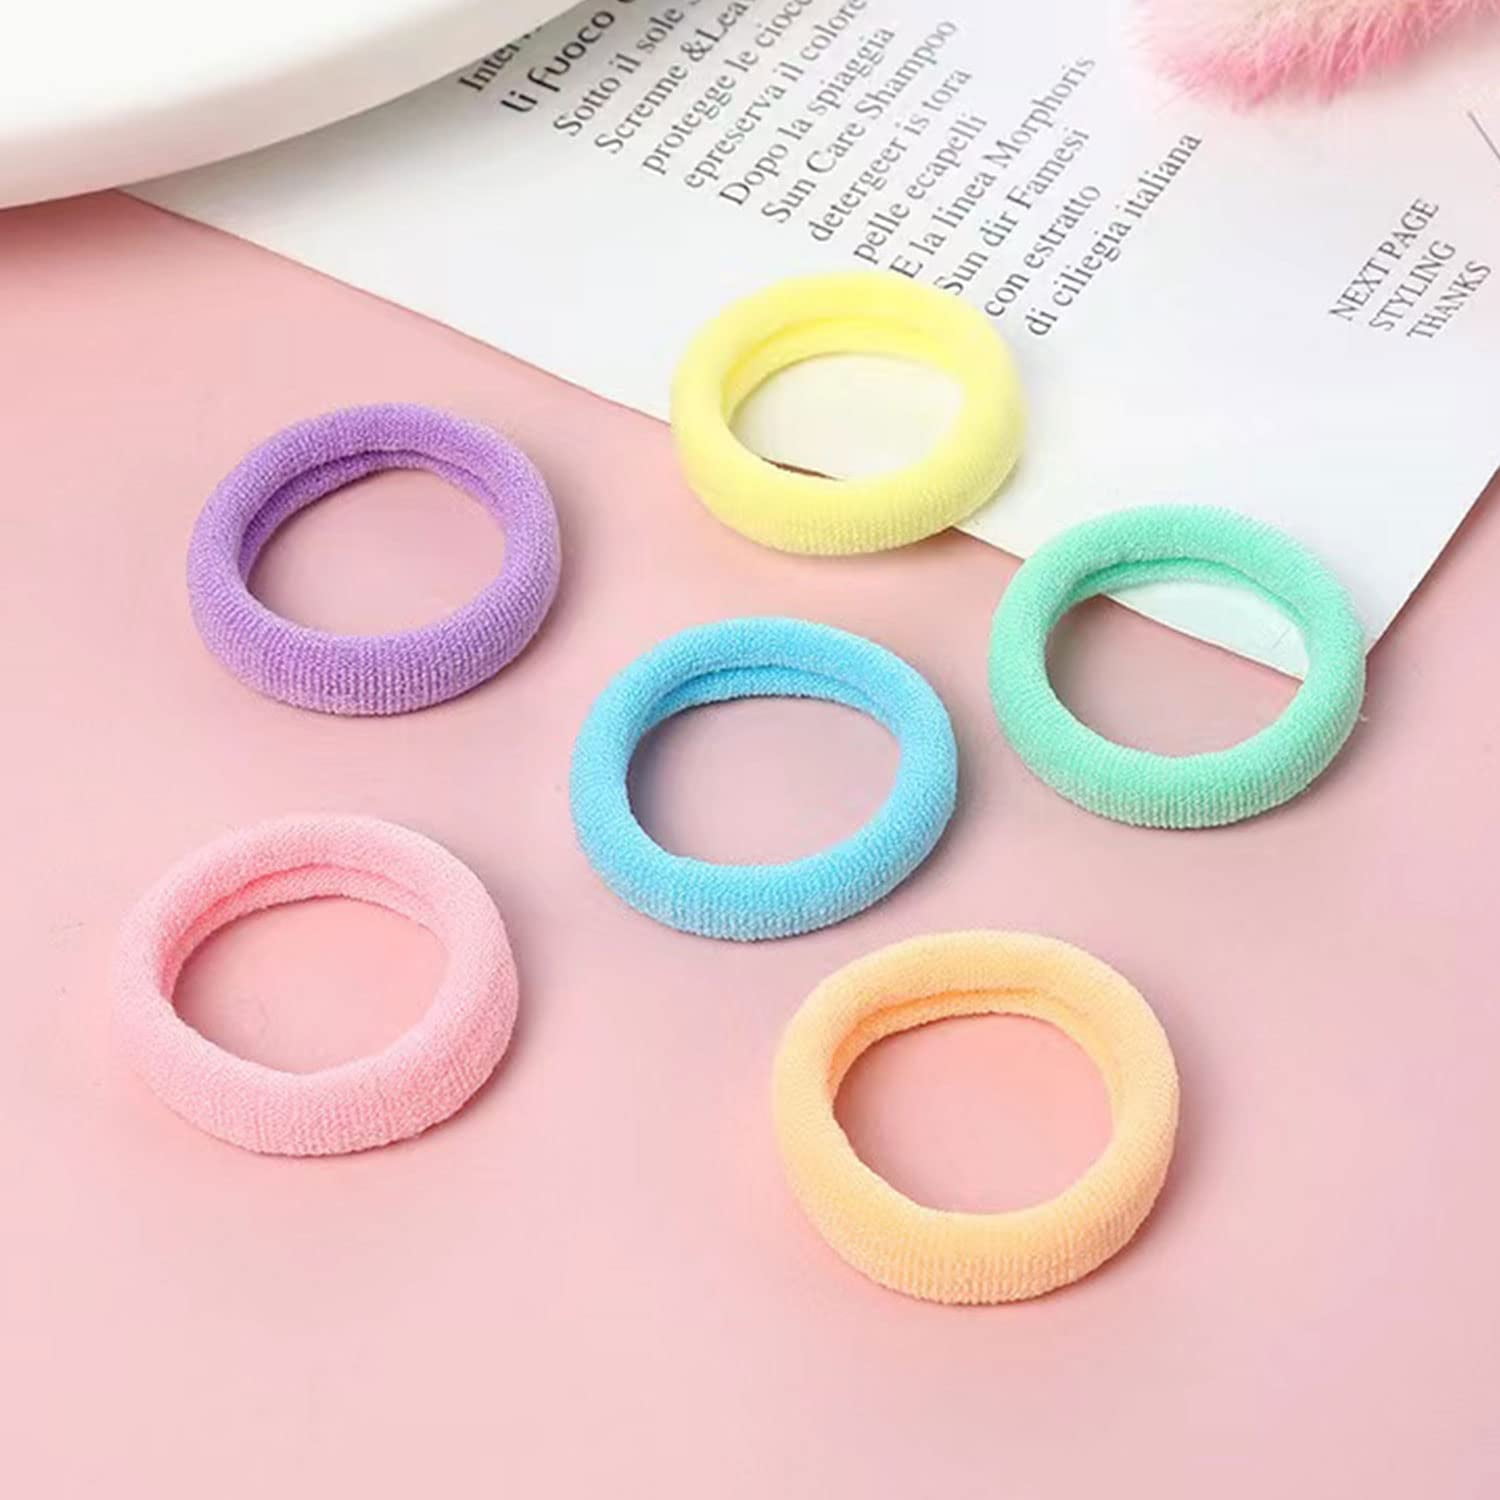 TIZZ 500pcs Baby Toddler Hair Ties, Elastic Hair Rubber Bands for Girls, 23 Colors Candy Cotton Toddler Hair Accessories, Small Soft Seamless Ponytail